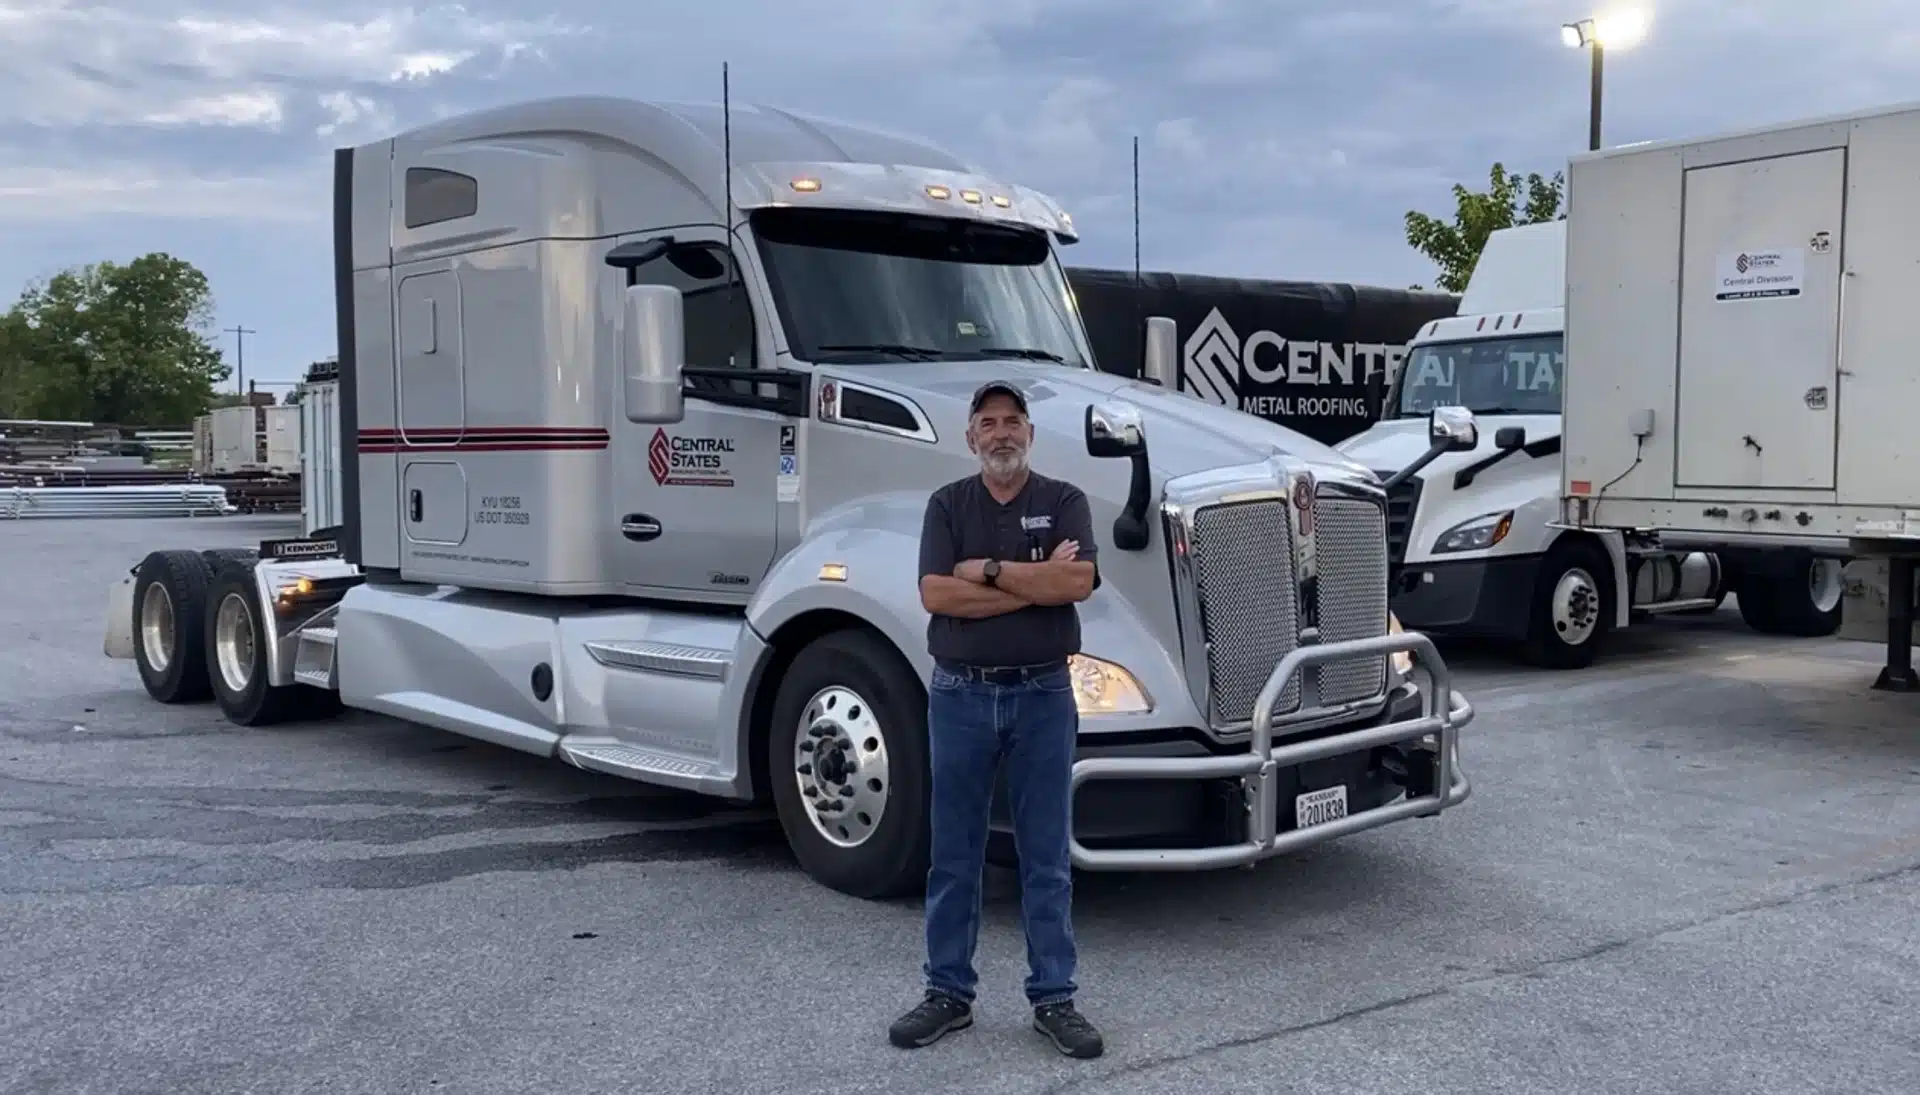 a driver for Central States stands proud in front of his truck